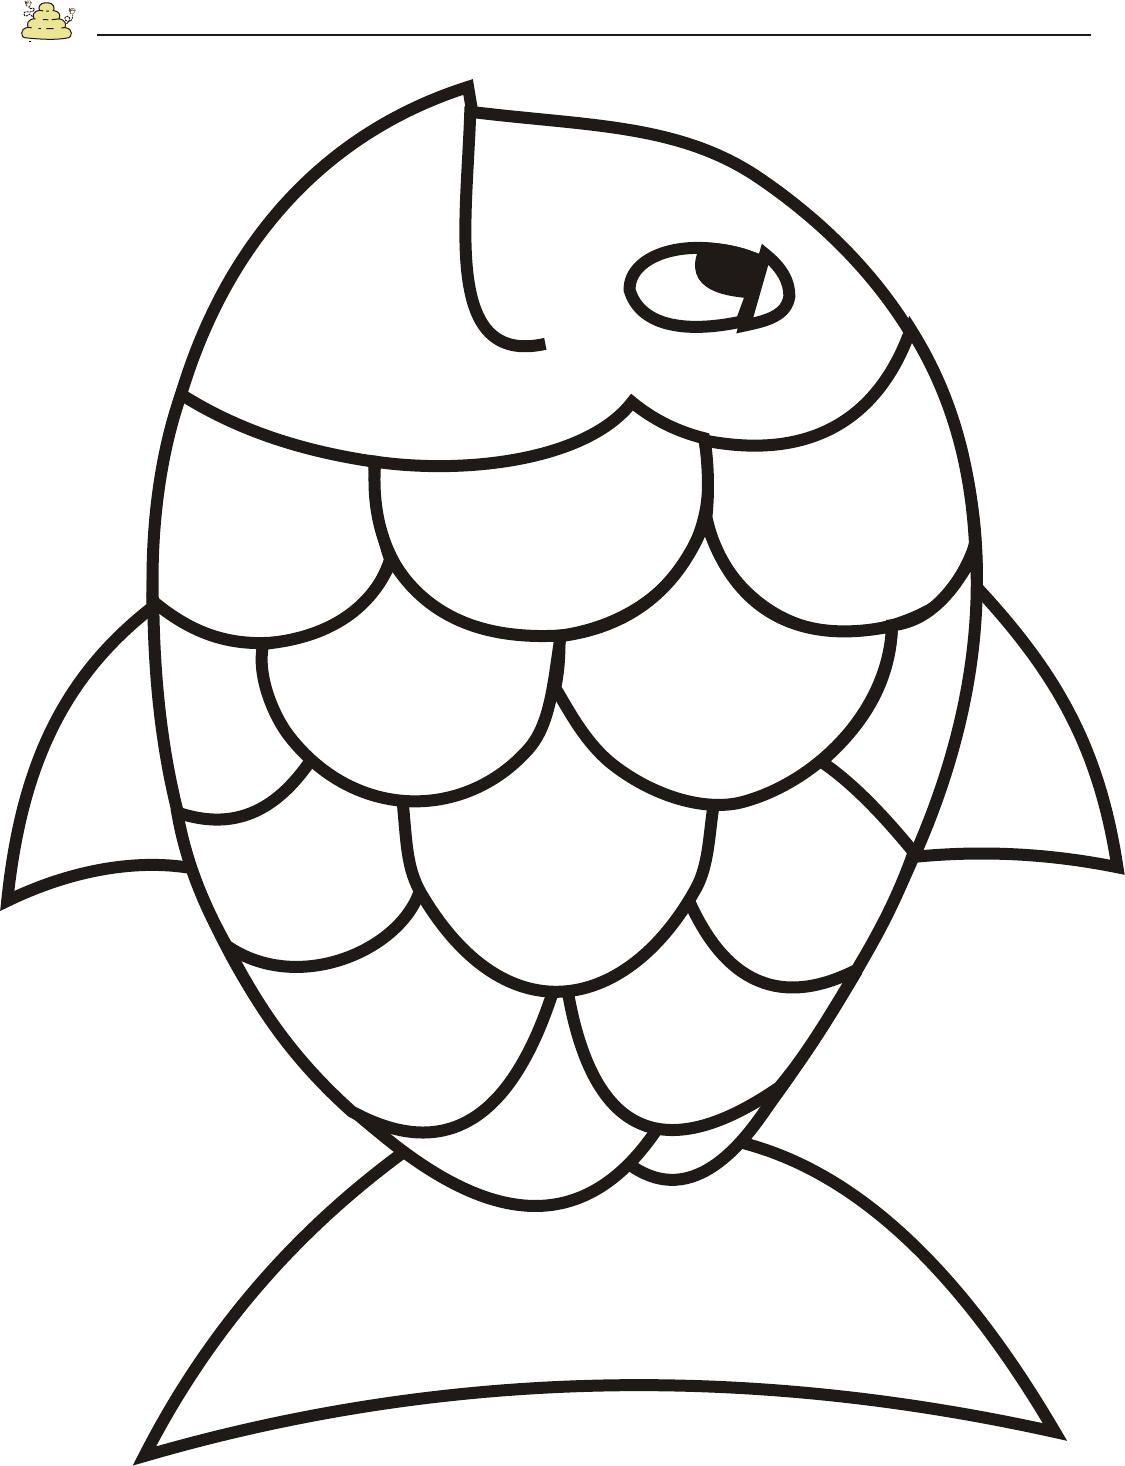 Free Rainbow Fish Template - Pdf | 2 Page(S) | Page 2 | Vbs - Free Printable Sea Creature Templates